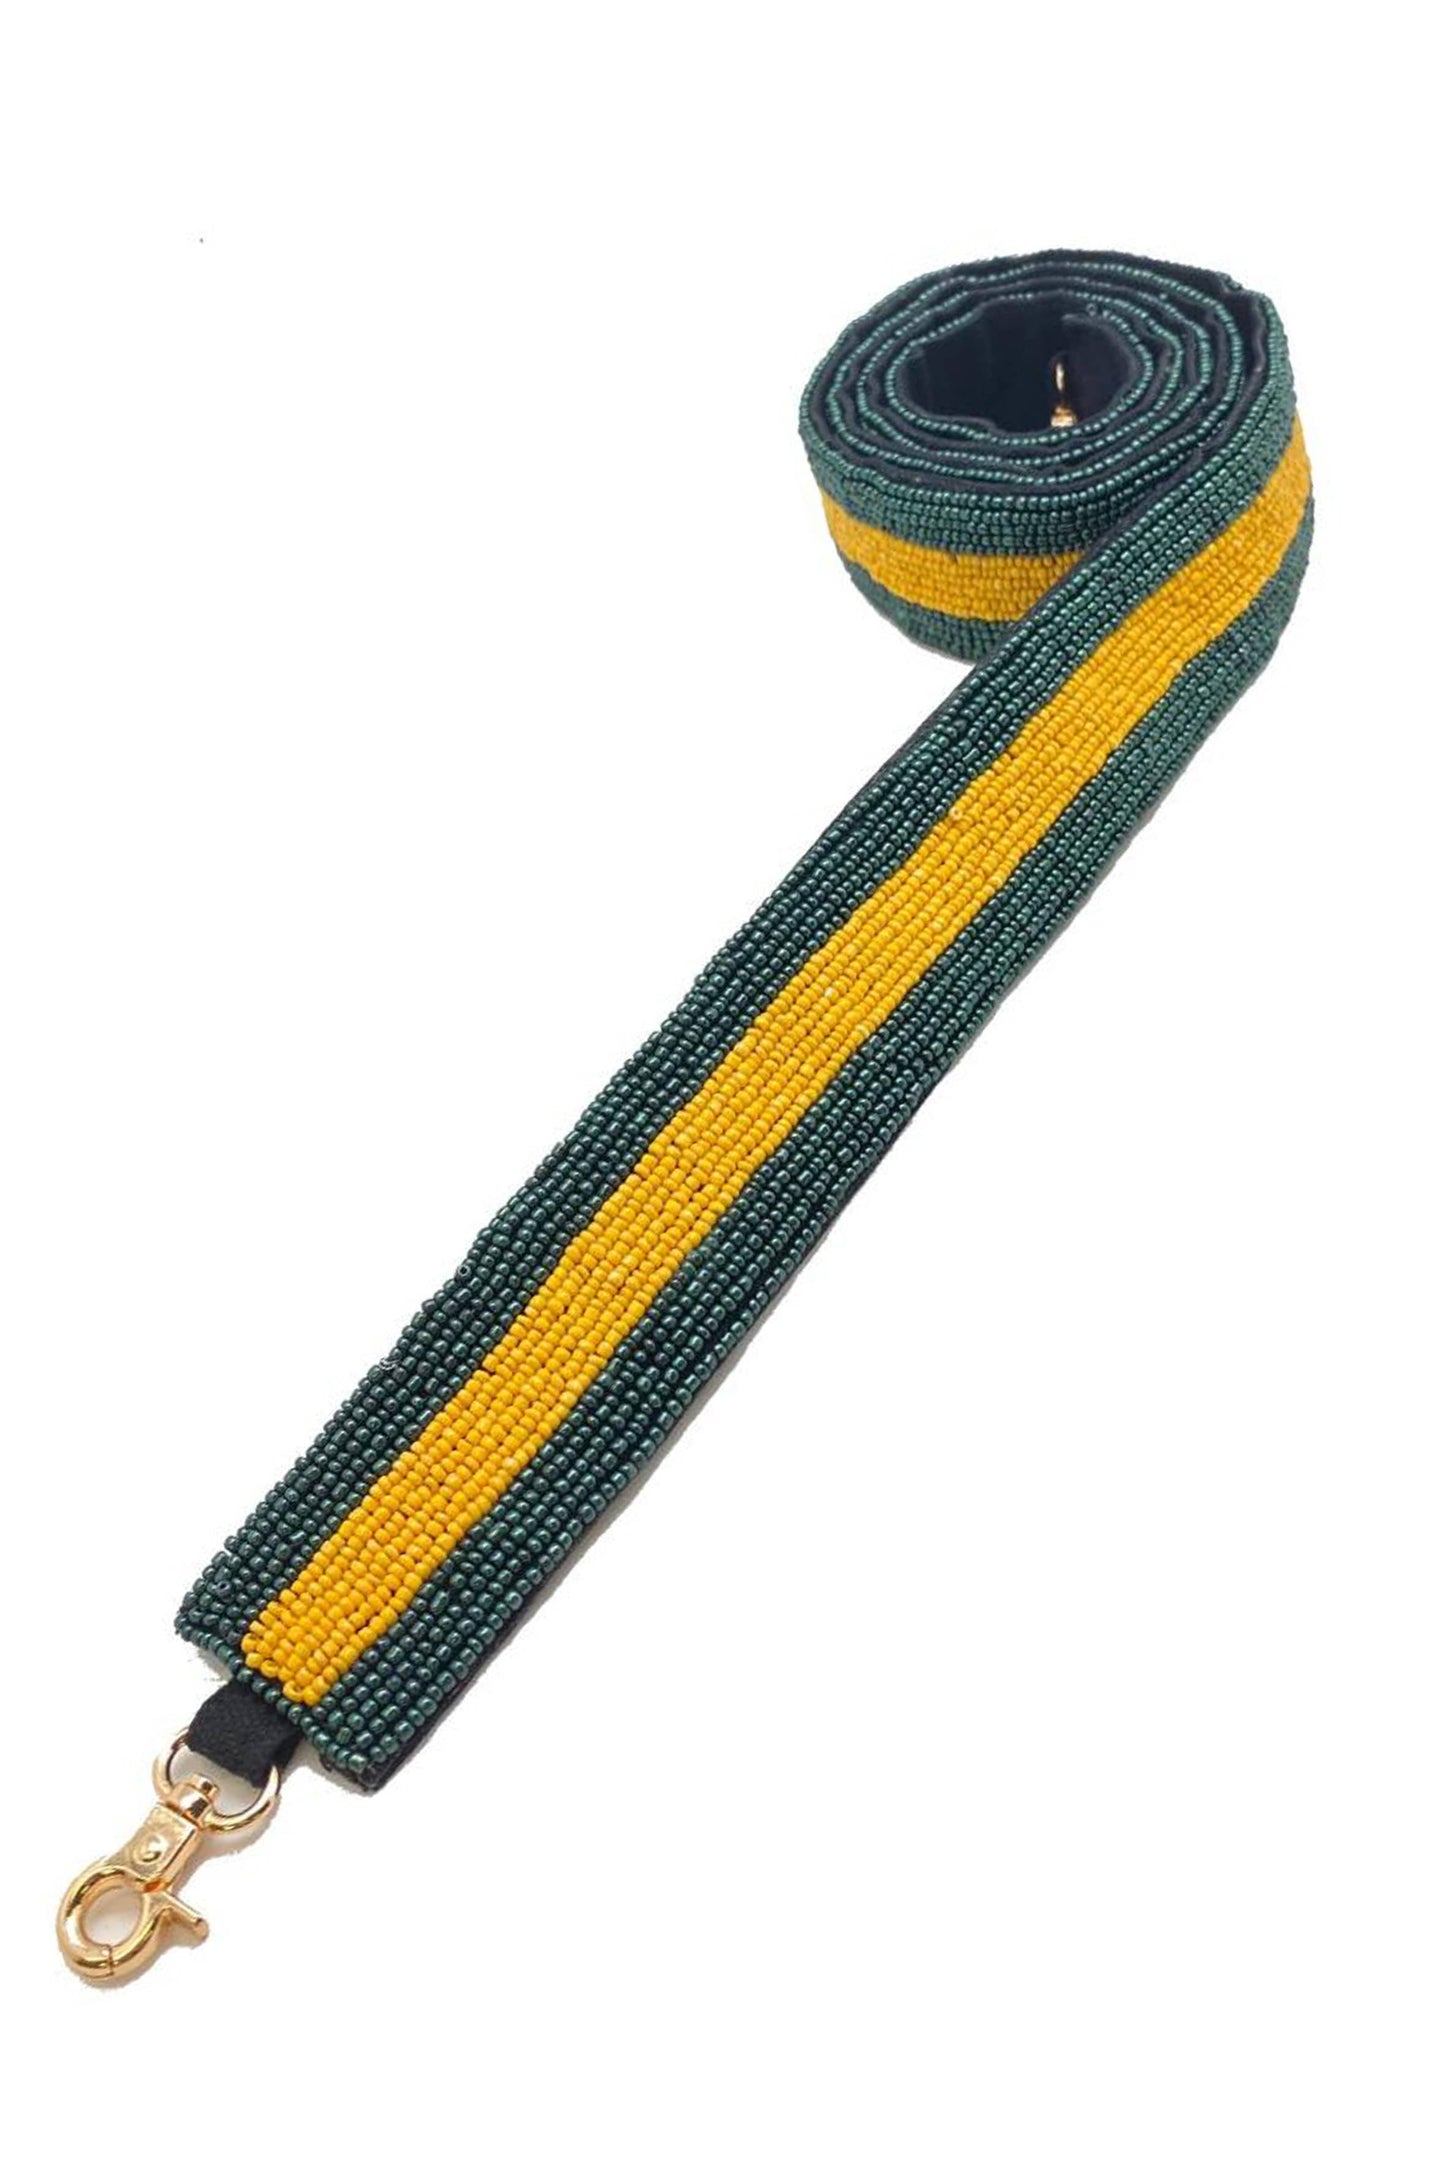 A Ole green and yellow striped Green/Yellow Beaded Guitar Bag Strap with a gold buckle.